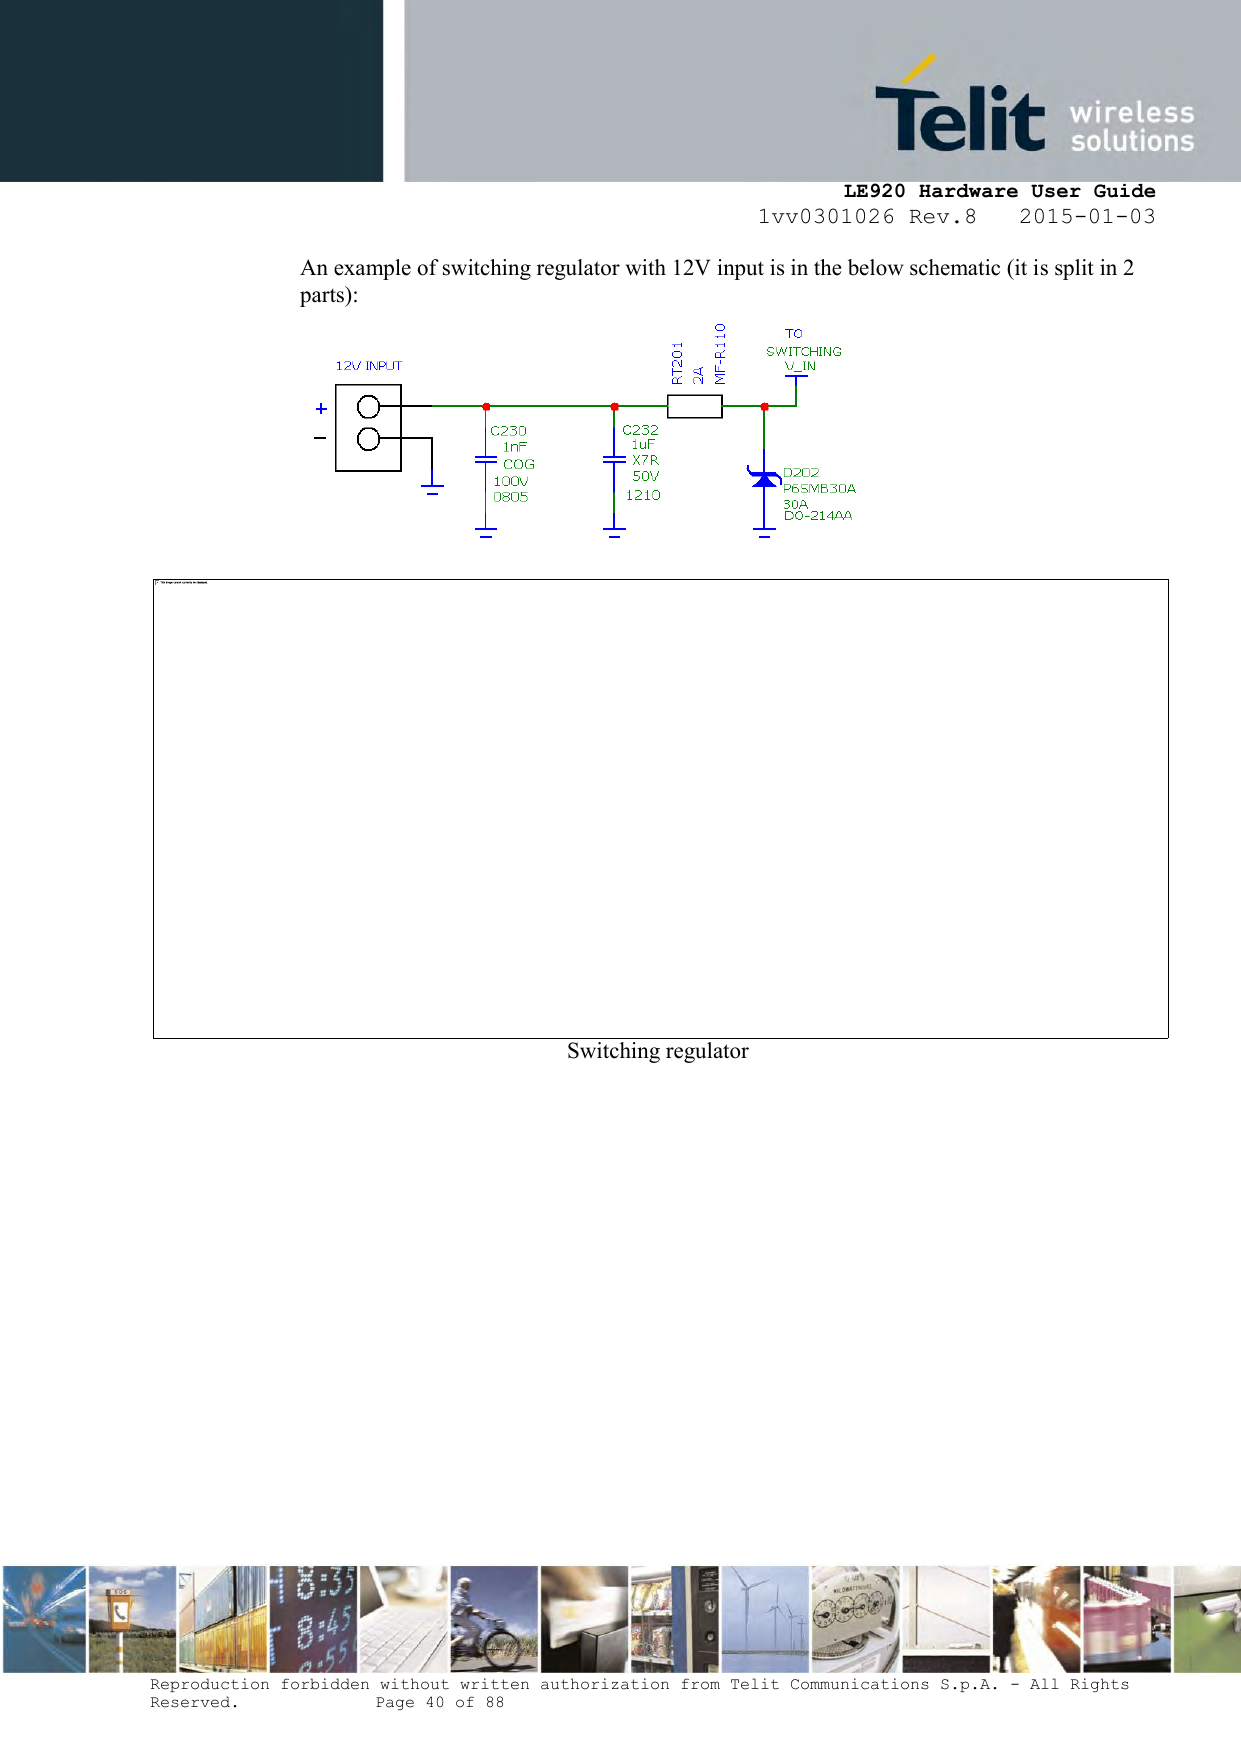     LE920 Hardware User Guide 1vv0301026 Rev.8   2015-01-03 Reproduction forbidden without written authorization from Telit Communications S.p.A. - All Rights Reserved.    Page 40 of 88  An example of switching regulator with 12V input is in the below schematic (it is split in 2 parts):  Switching regulator   